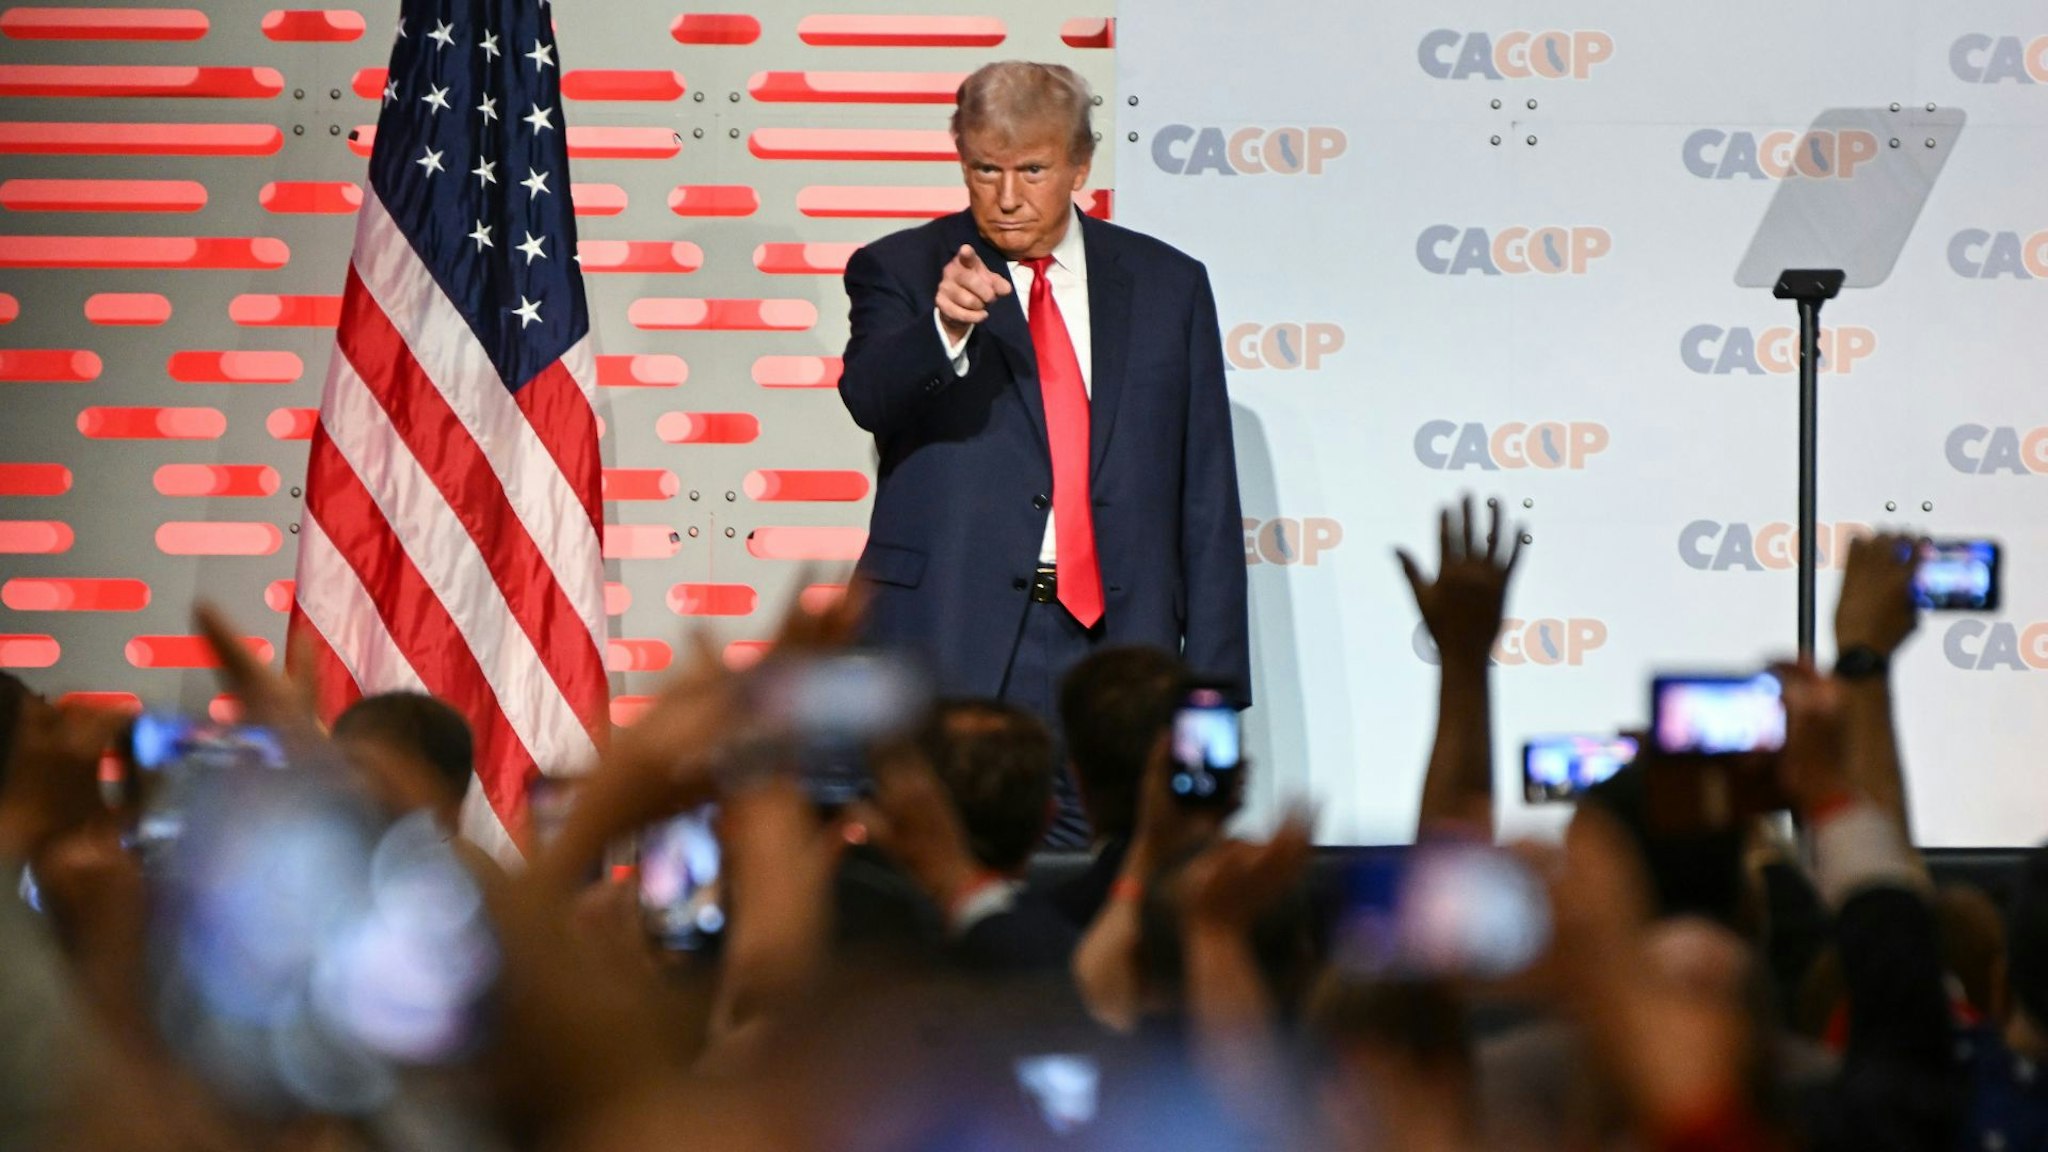 Anaheim, California - September 29: Former U.S. President Donald Trump delivers an address during the California Republican Convention on Friday, Sept. 29, 2023, in Anaheim, California.